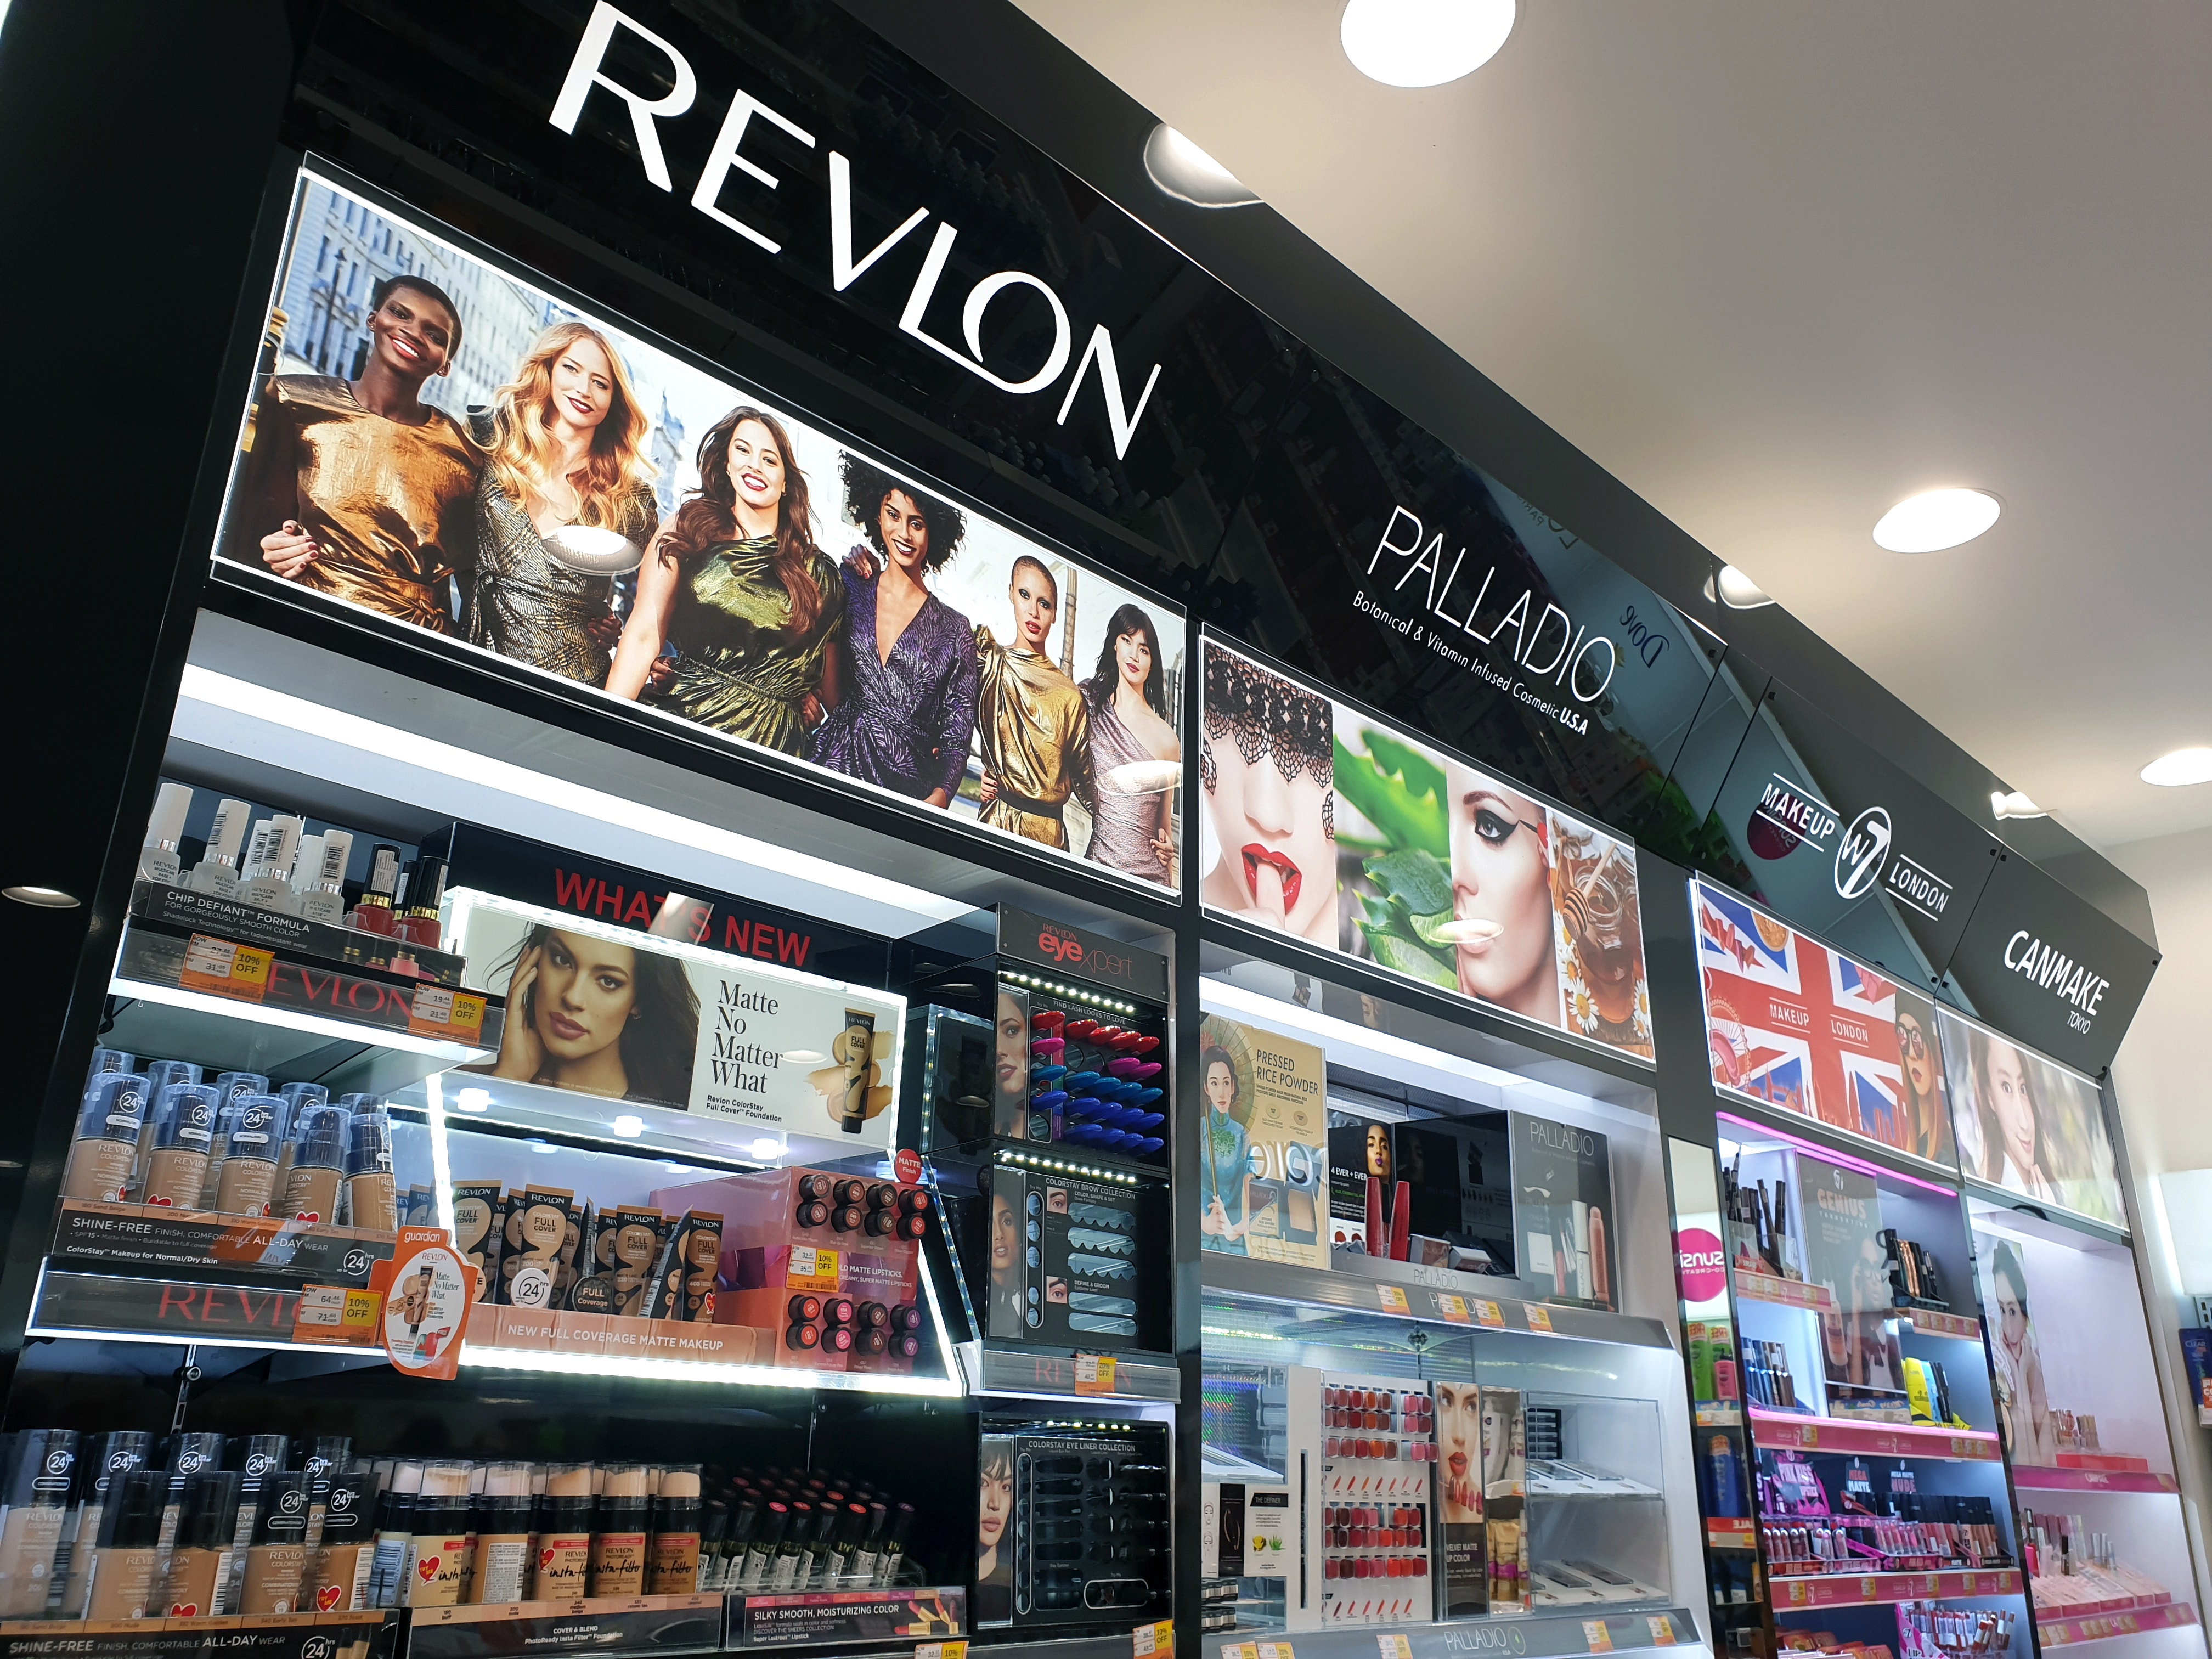 Revlon Climbs, Singing Machine Moves Up And Weber Makes Big Move: 5 Short Squeeze Stocks That May Soar This Week